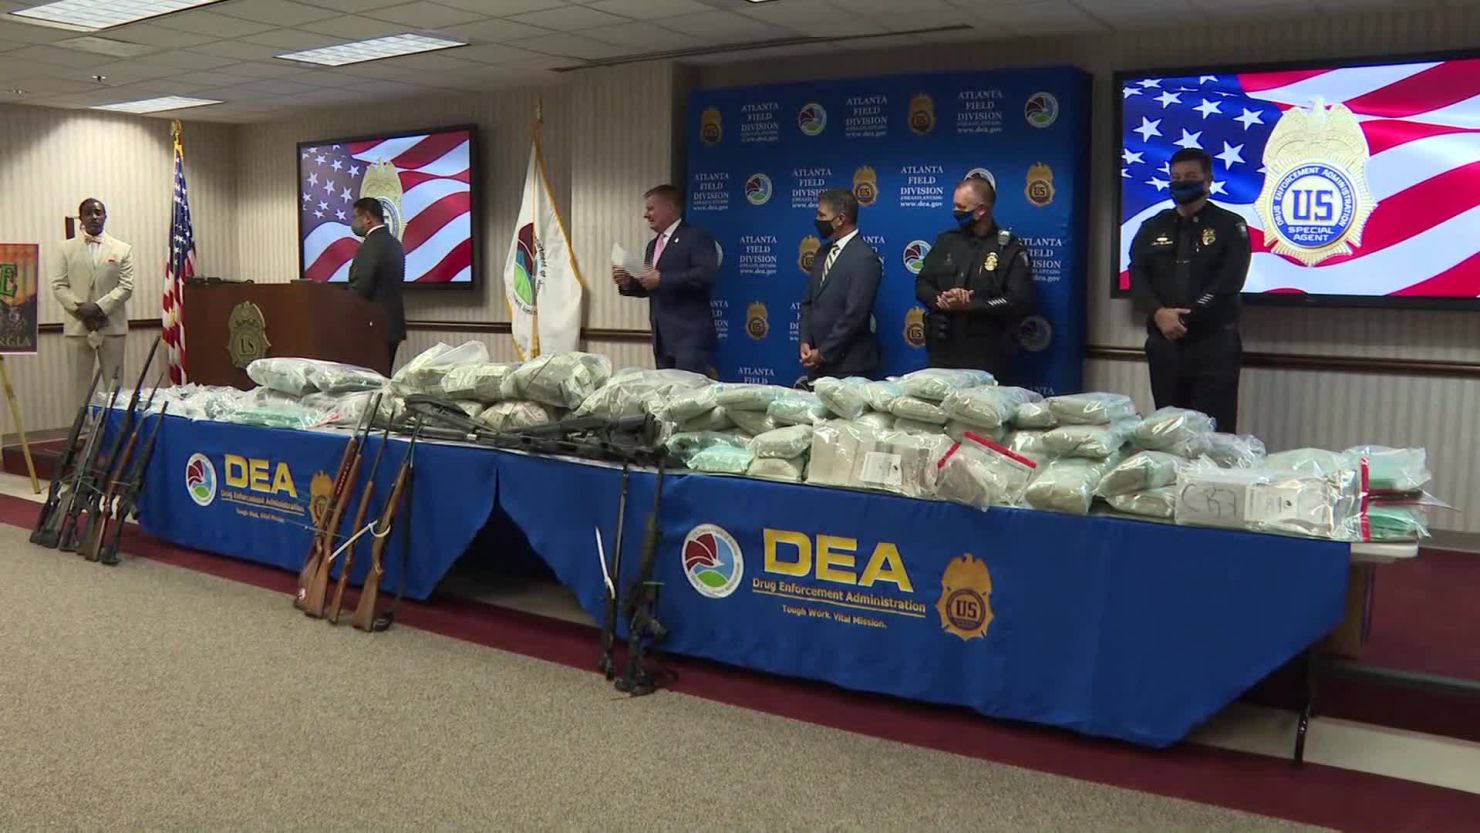 $8 million in drugs seized in largest heroin bust in Georgia's history,  officials say